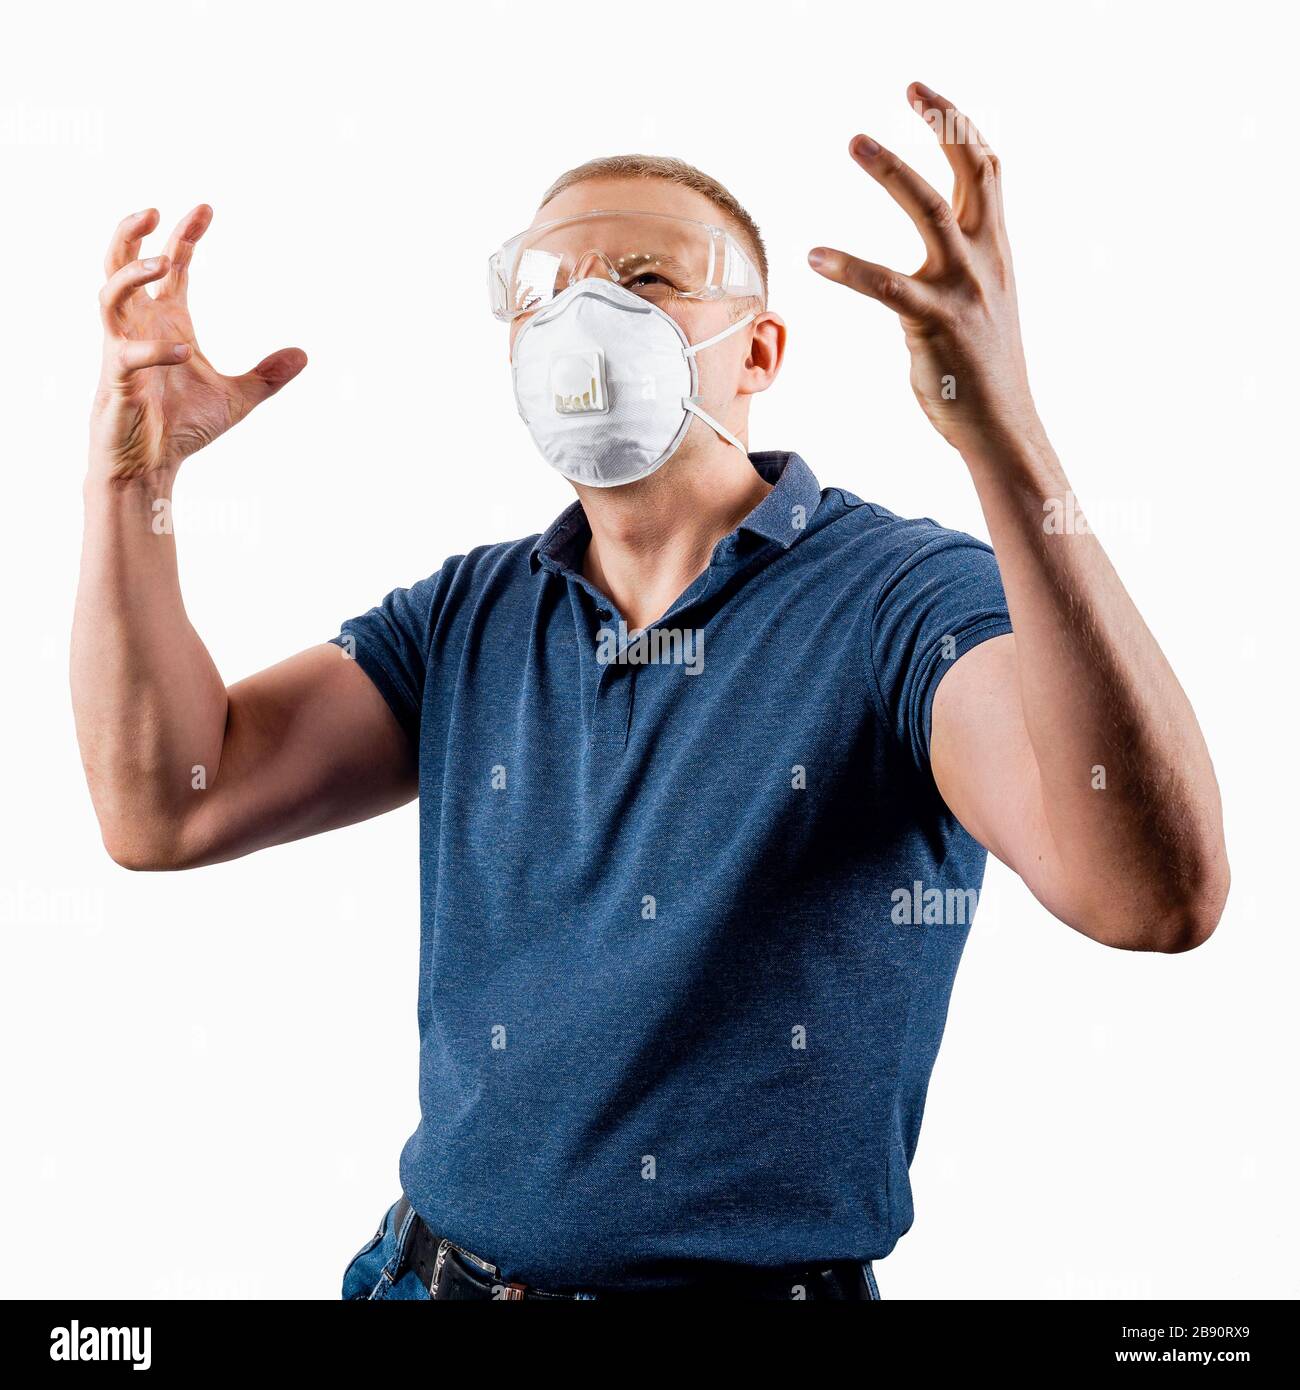 Man in a protective mask isolated on a white background. A person in fear and panic before the virus. Stock Photo